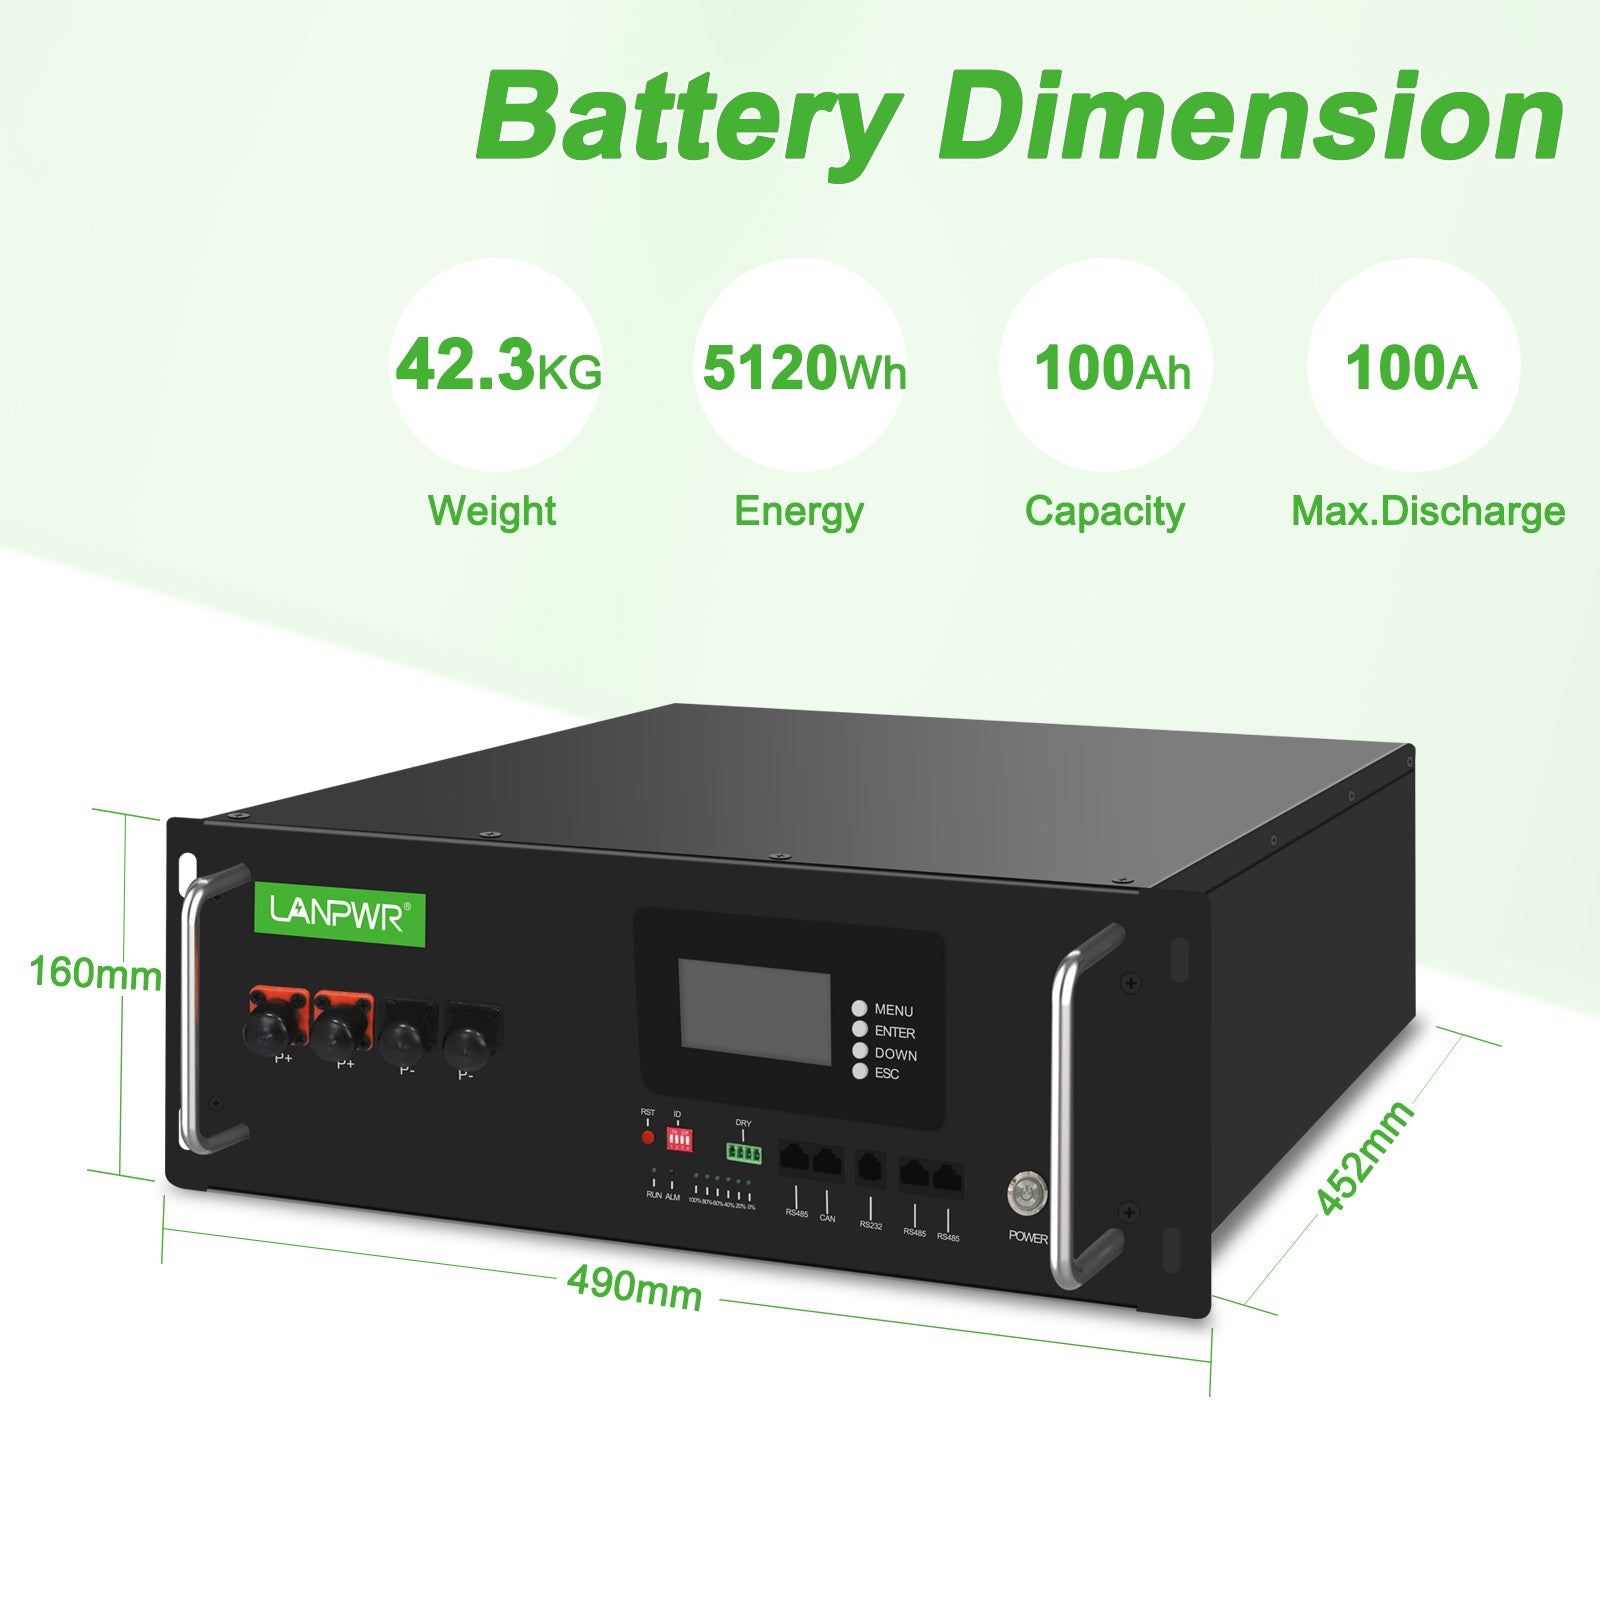 LANPWR 51.2V 100Ah LiFePO4 Battery with 16 cells, Built-In 100A BMS, 5120W Energy, Max. load 5120W